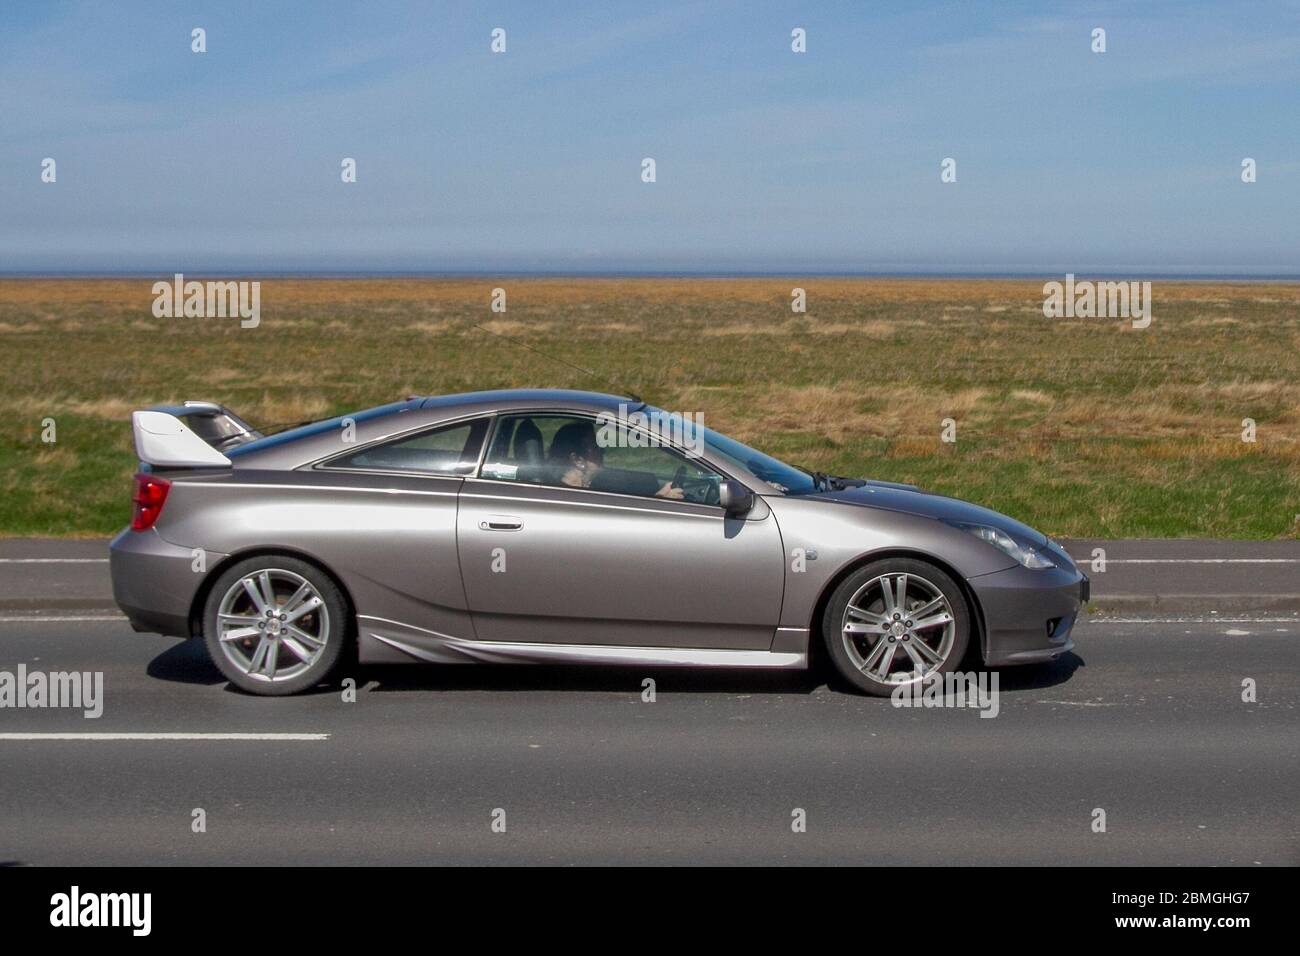 2006 silver Toyota Celica Vvtl-I GT; UK Vehicular traffic, road transport, modern vehicles, saloon cars, vehicle driving, roads & motors, motoring south-bound on the coast road in Southport, UK Stock Photo